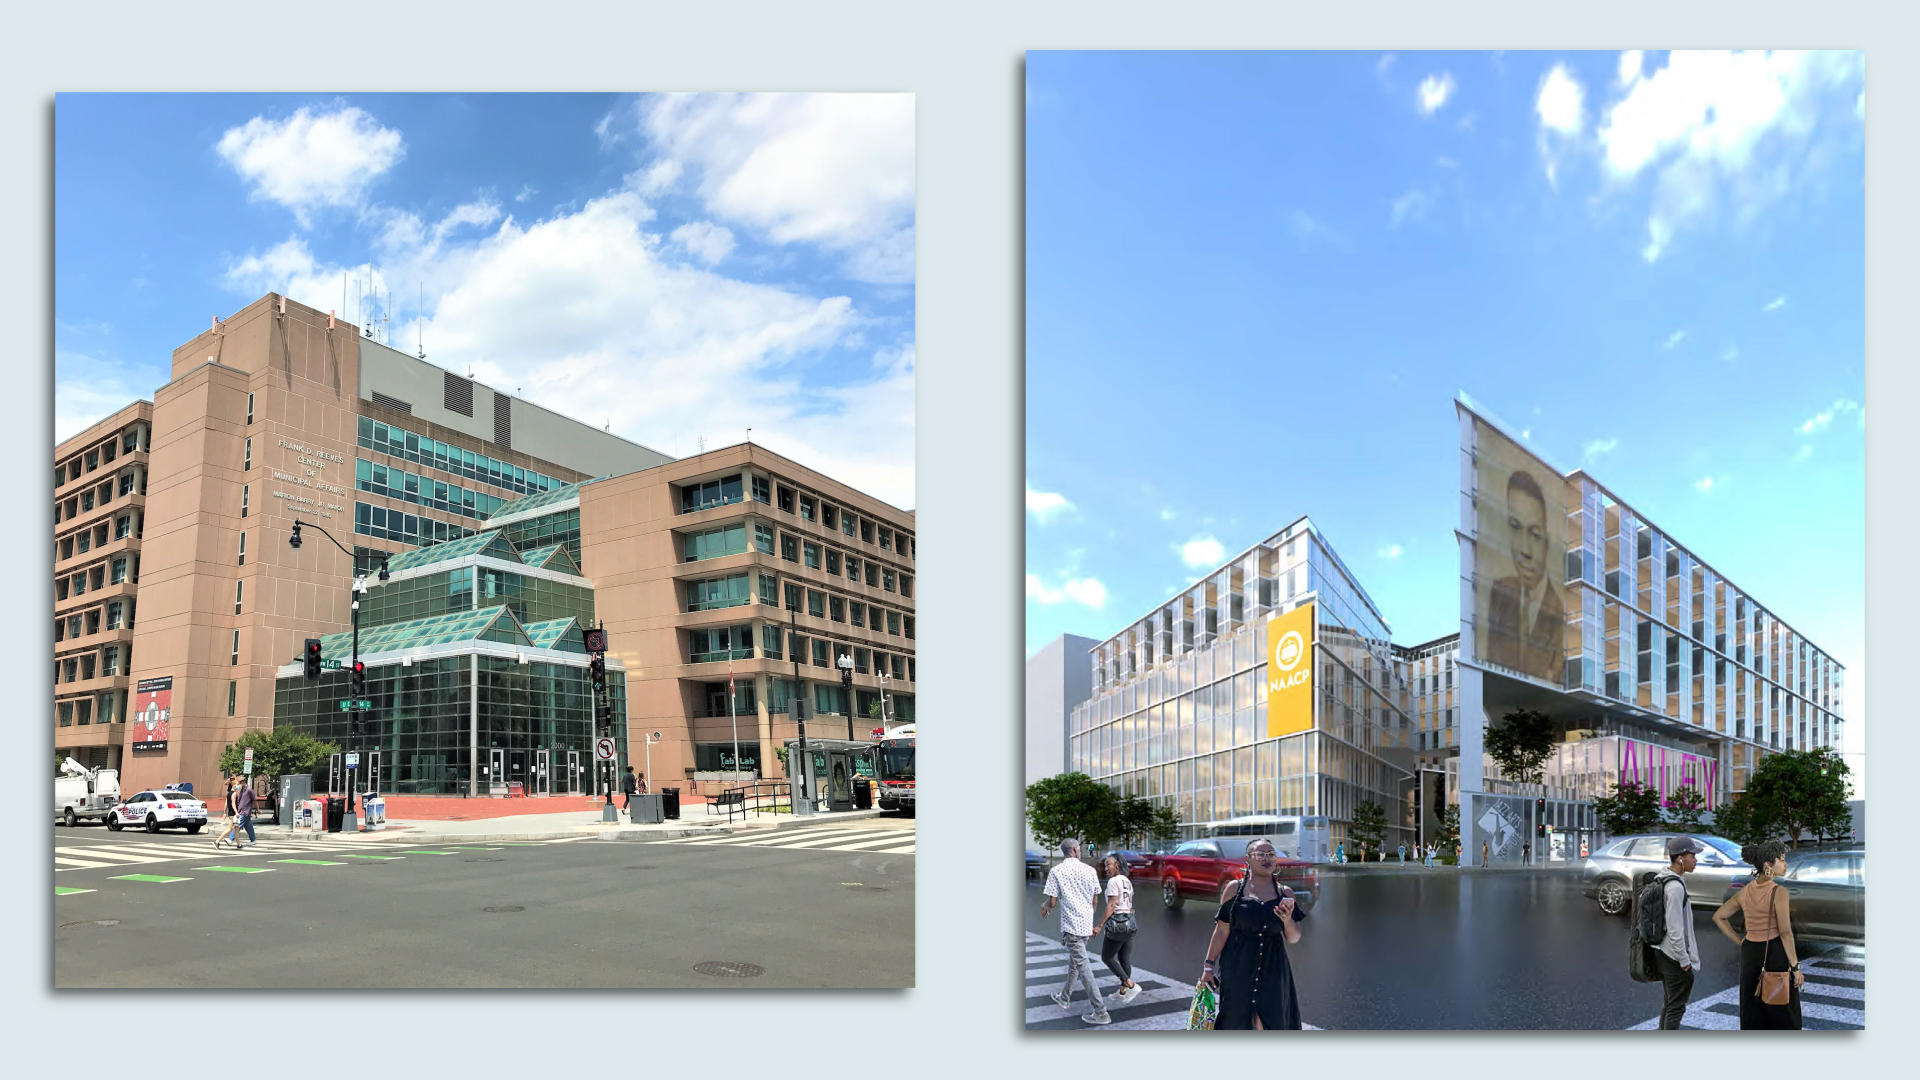 Side by side: The current Reeves Center building next to a rendering of a glassy, new building to replace it